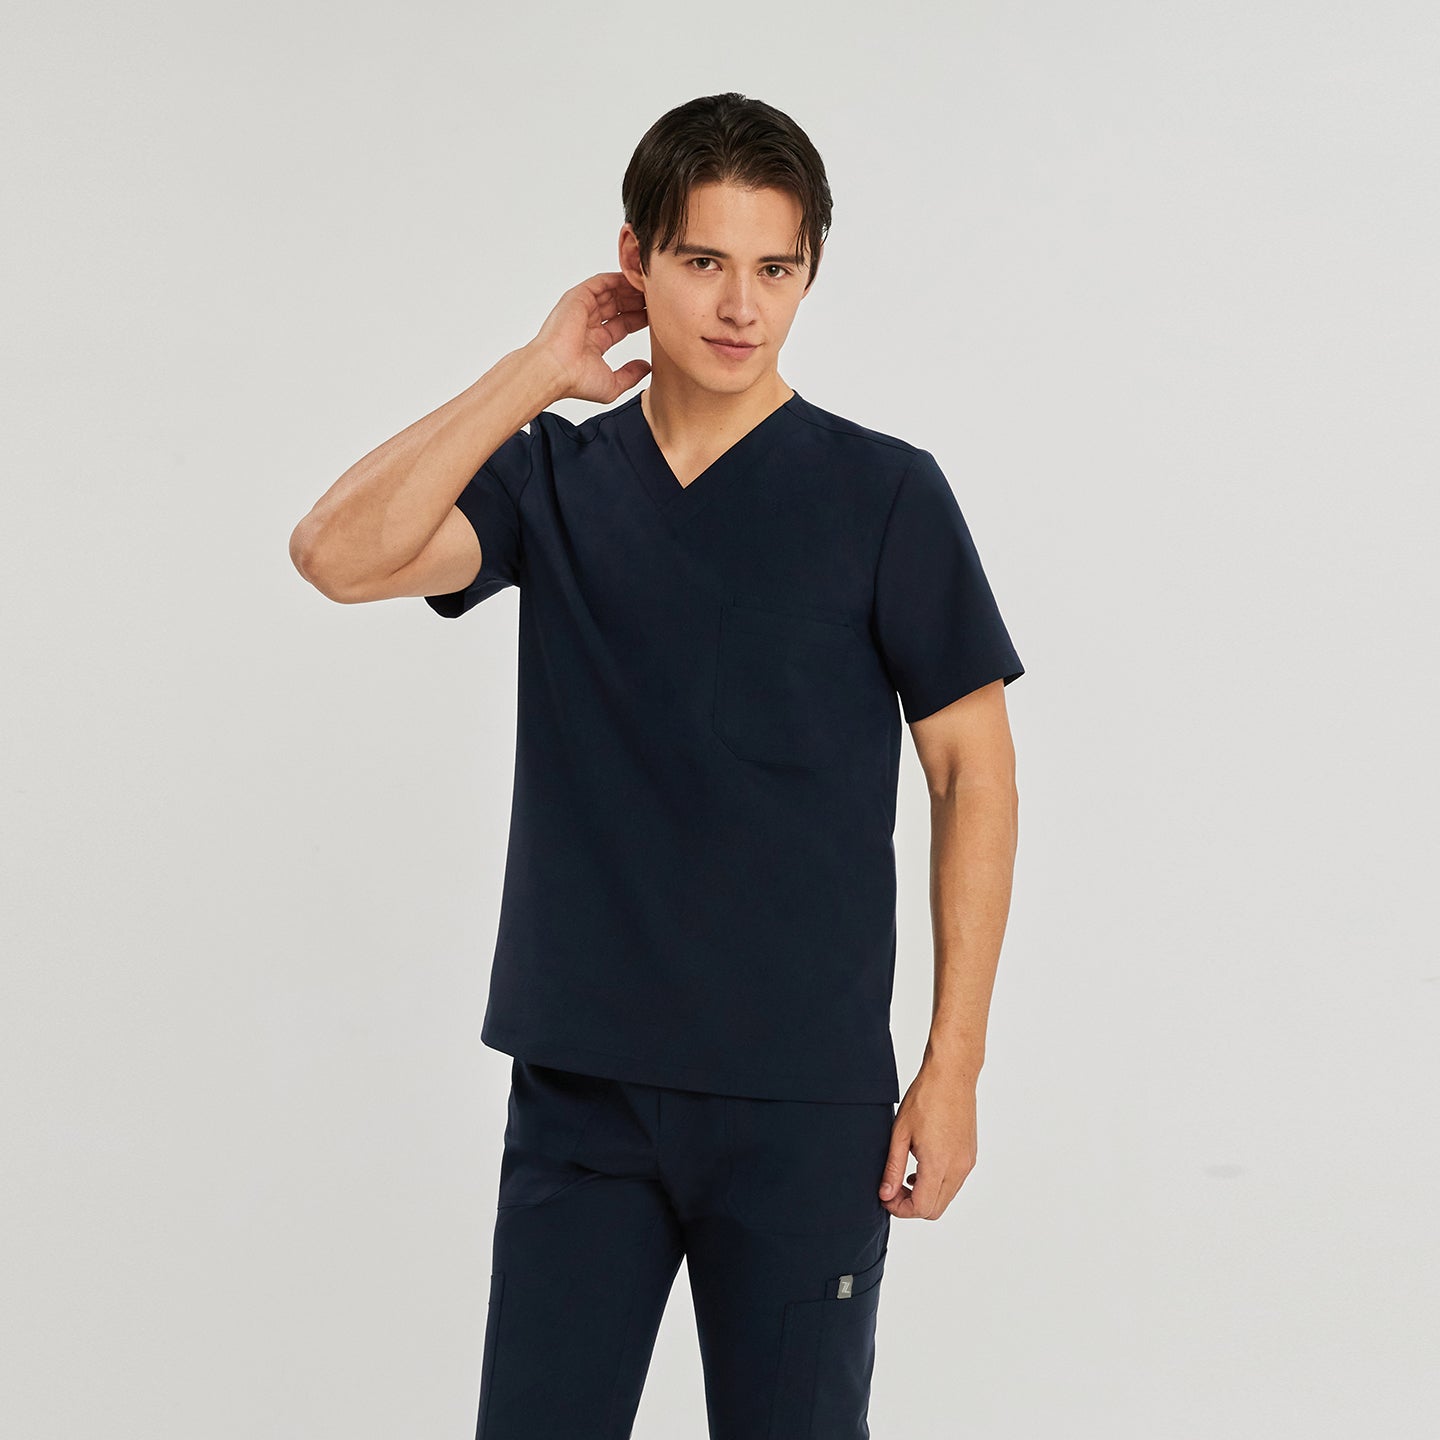 Male model wearing a navy blue scrub top with a V-neck and a single chest pocket, standing against a plain background with his right hand touching his neck,Navy